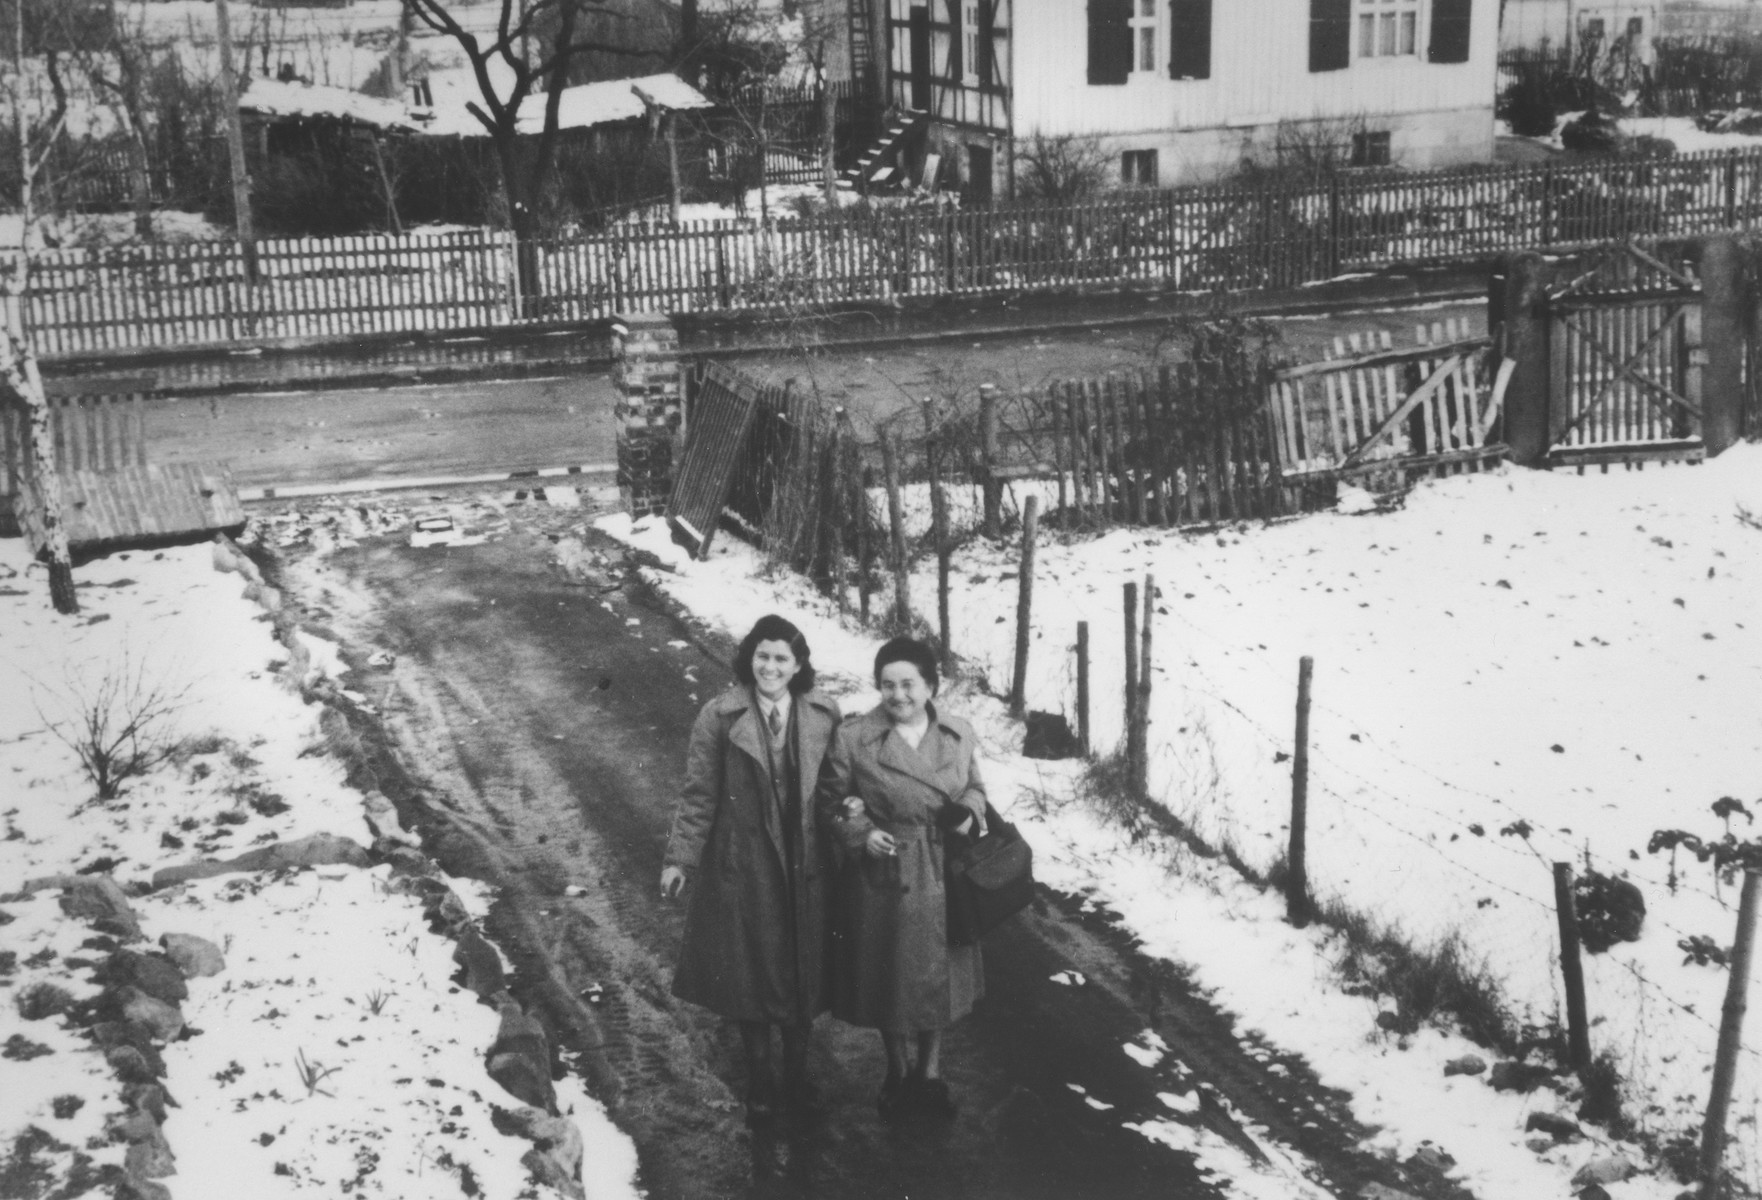 Two Jewish female relief workers walk along a path in the Herzog displaced persons camp.

Pictured on the left is Miriam, a sabra sent by the Jewish Agency for Palestine to teach Hebrew to Jewish DPs.  On the right is Mrs. Greenberg from the American Jewish Joint Distribution Committee in New York.